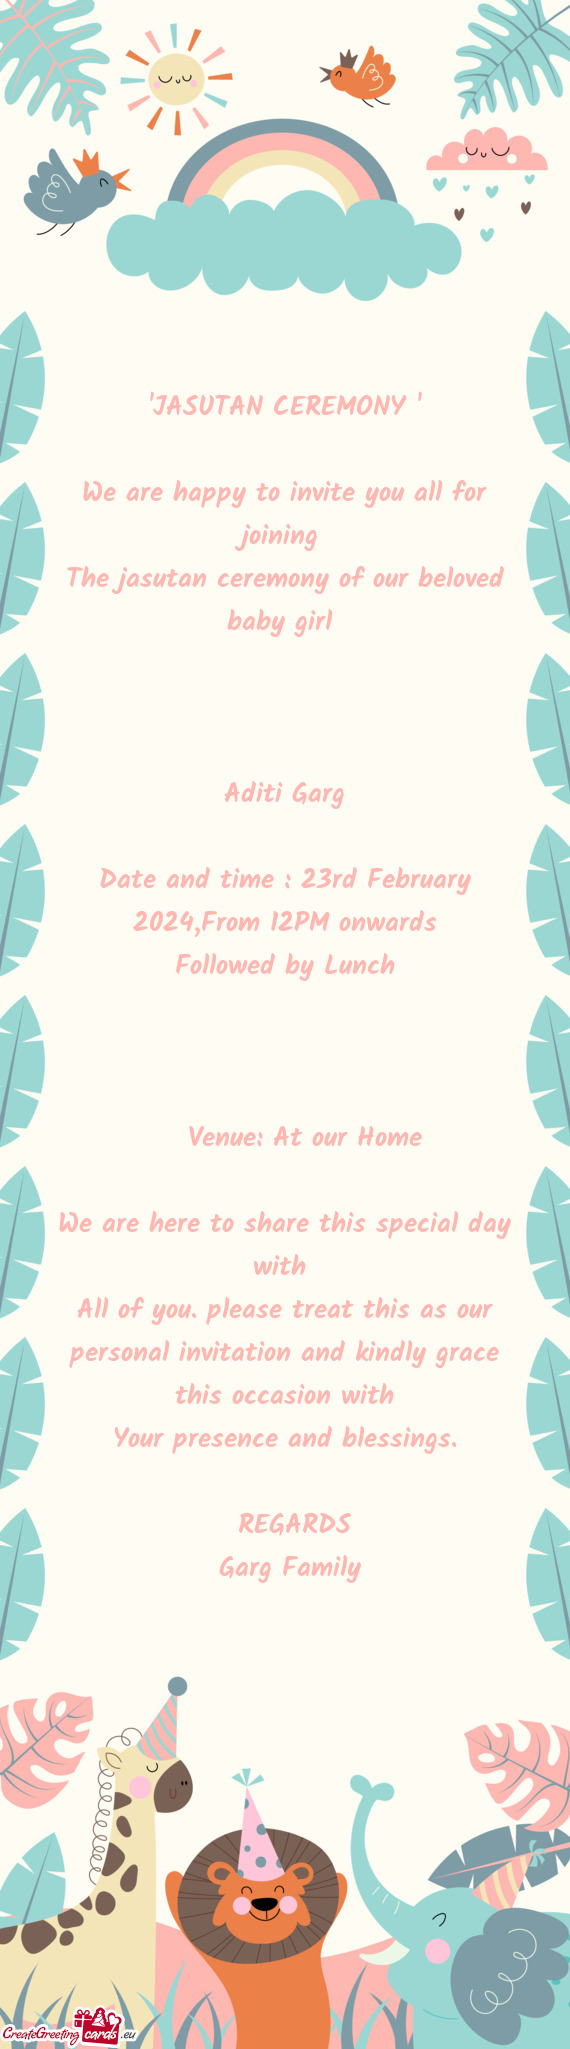 Date and time : 23rd February 2024,From 12PM onwards